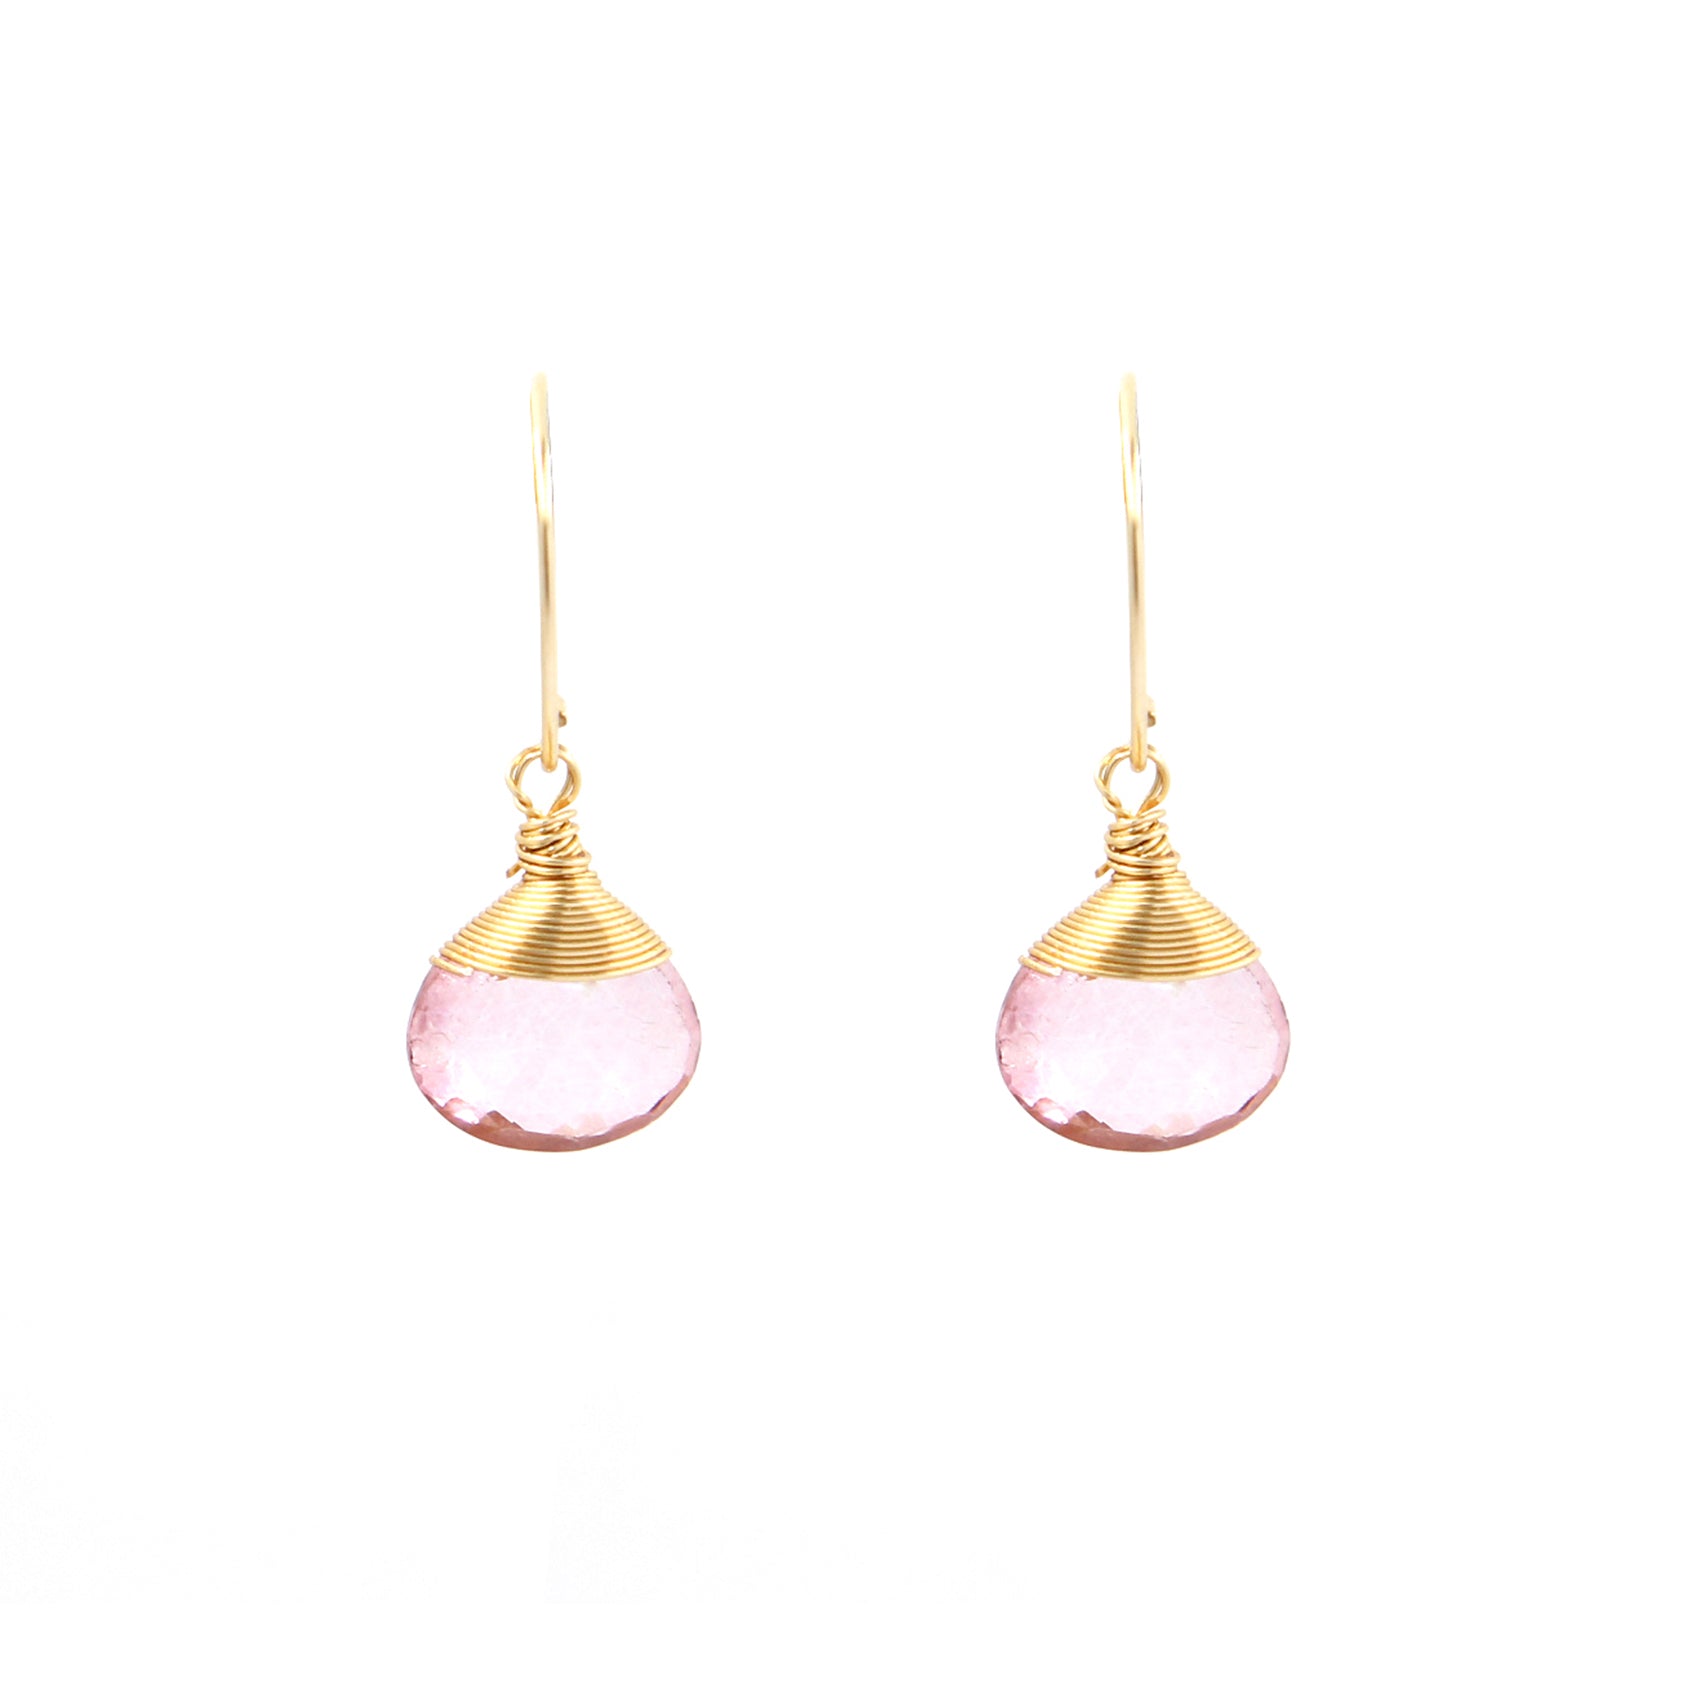 Gosia Orlowska Presents 'Donna' Gemstone Drop Earrings for Timeless Sophistication